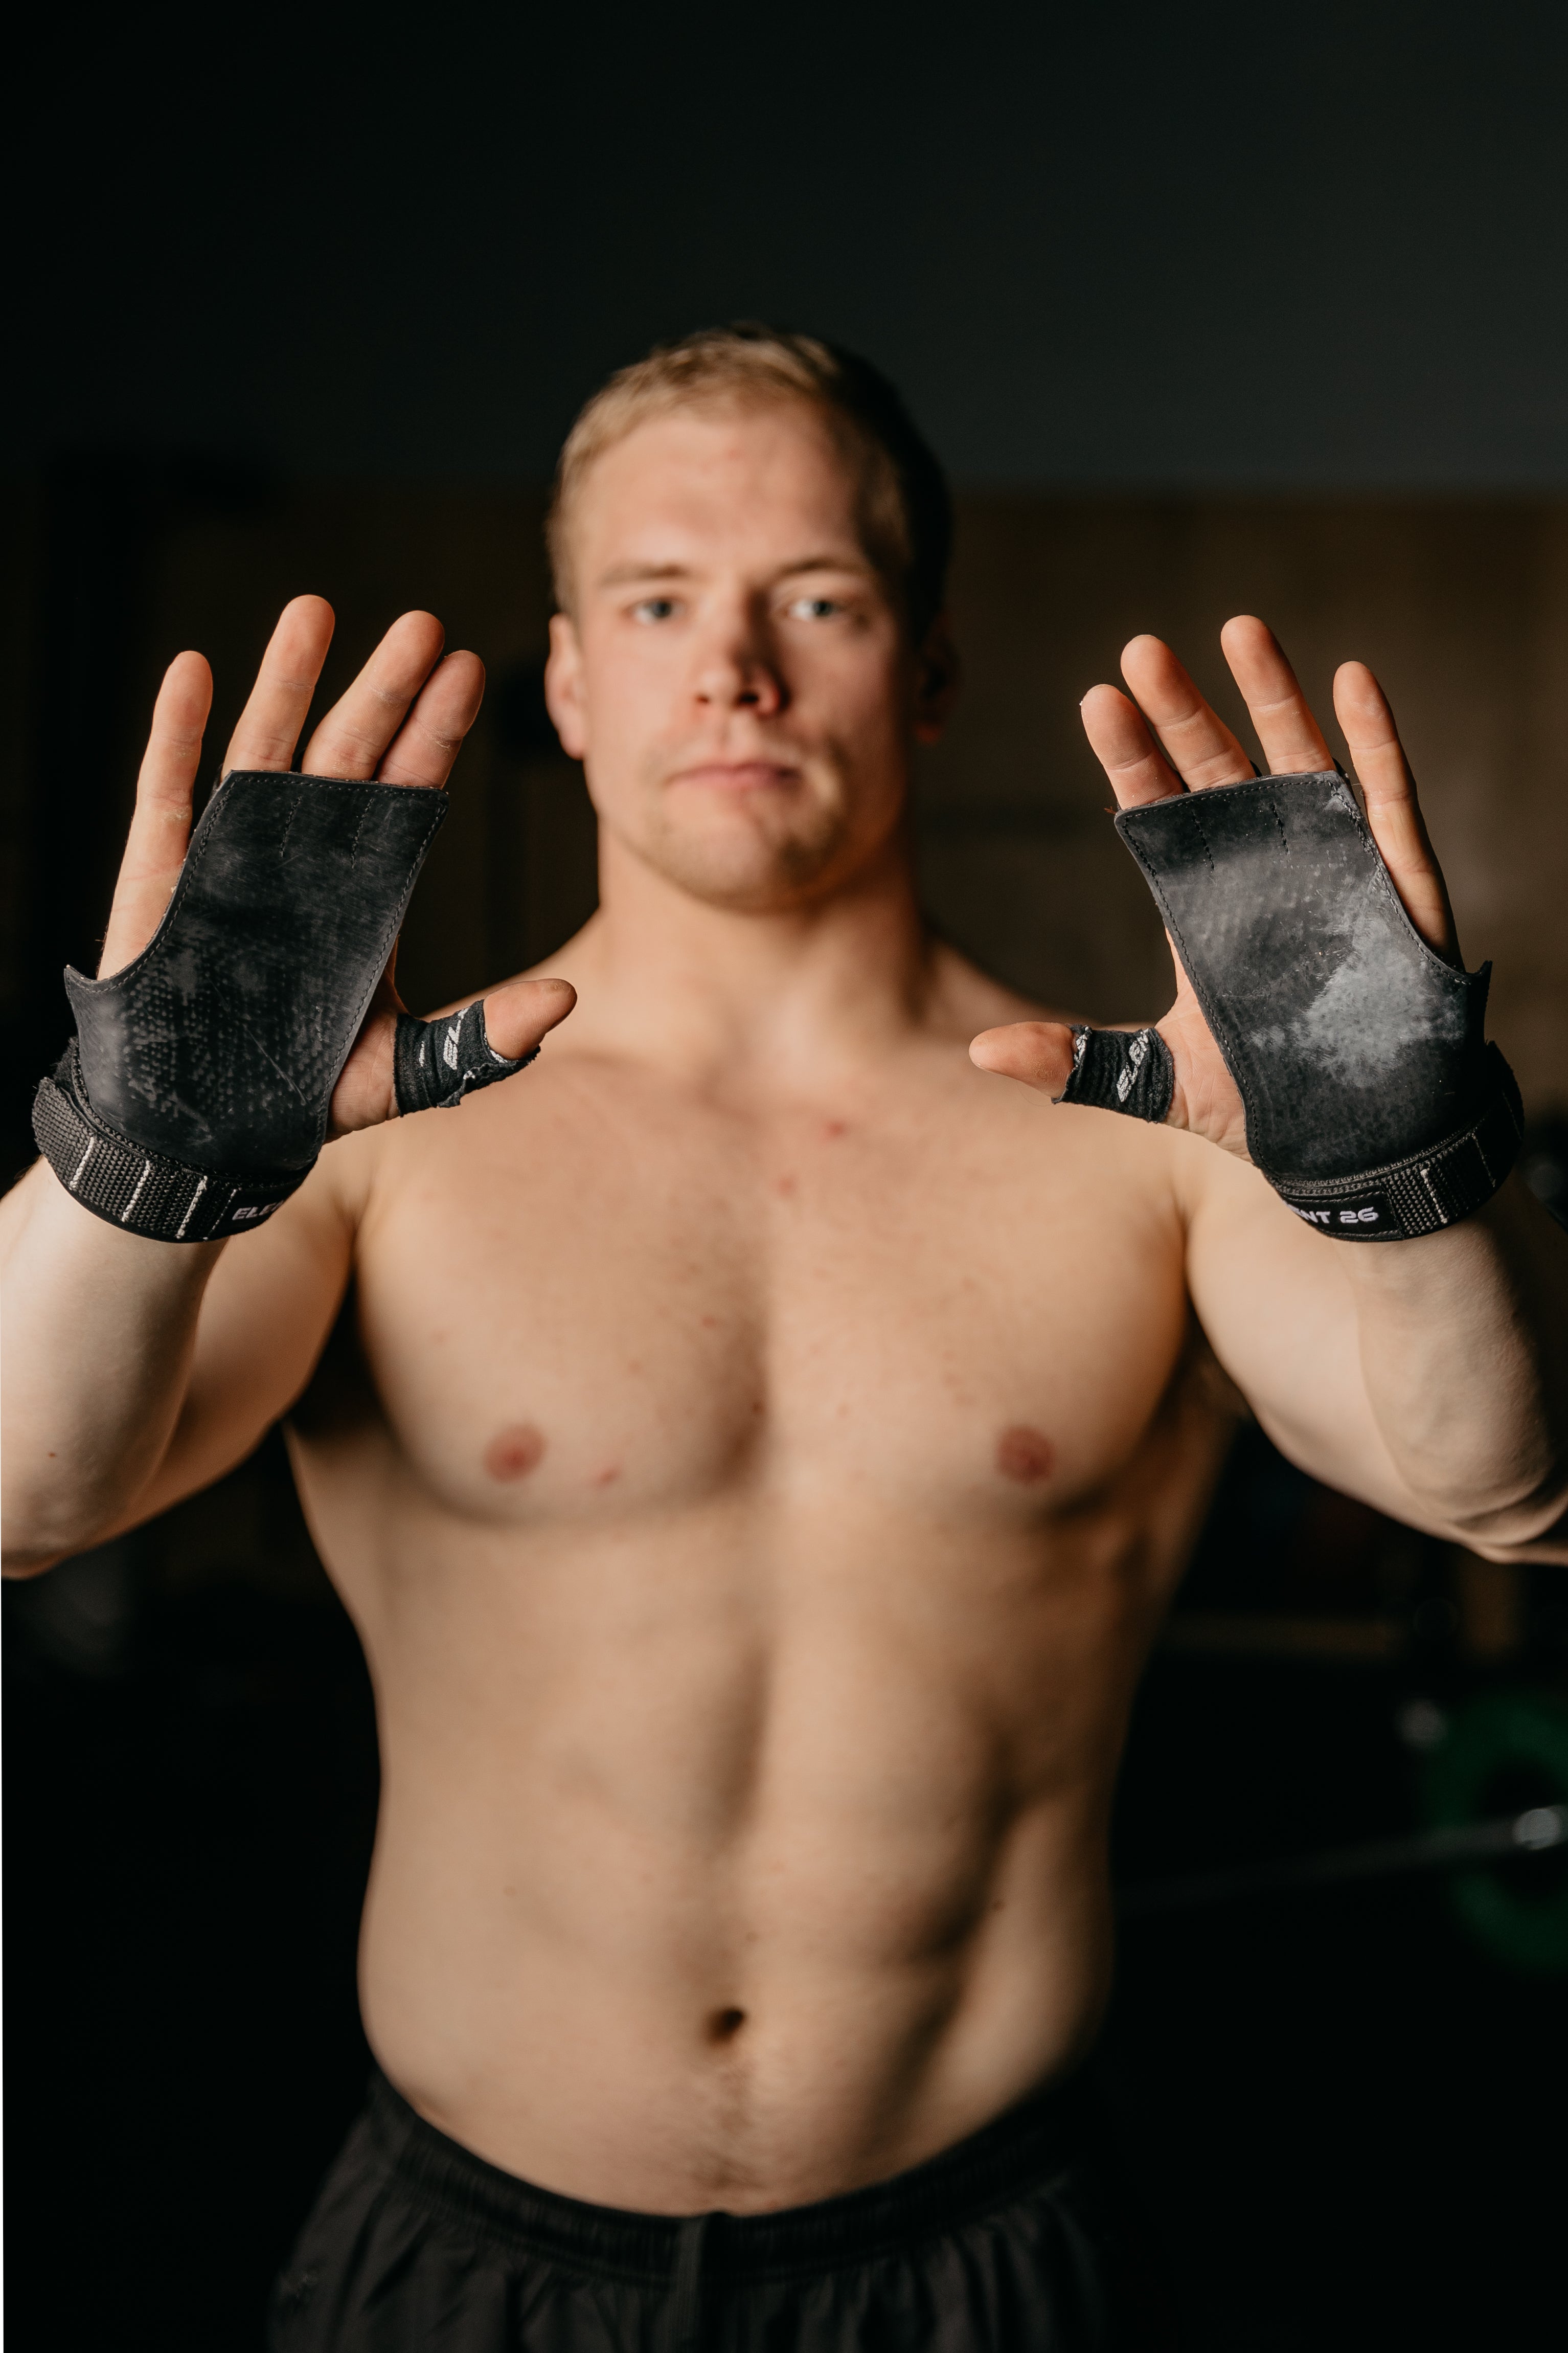 Element 26 IsoGrip Gymnastic Hand Grips - Hand Protection, Isoprene Polymer  Material, Adjustable Strap, Durable Design, 3 Size Variants